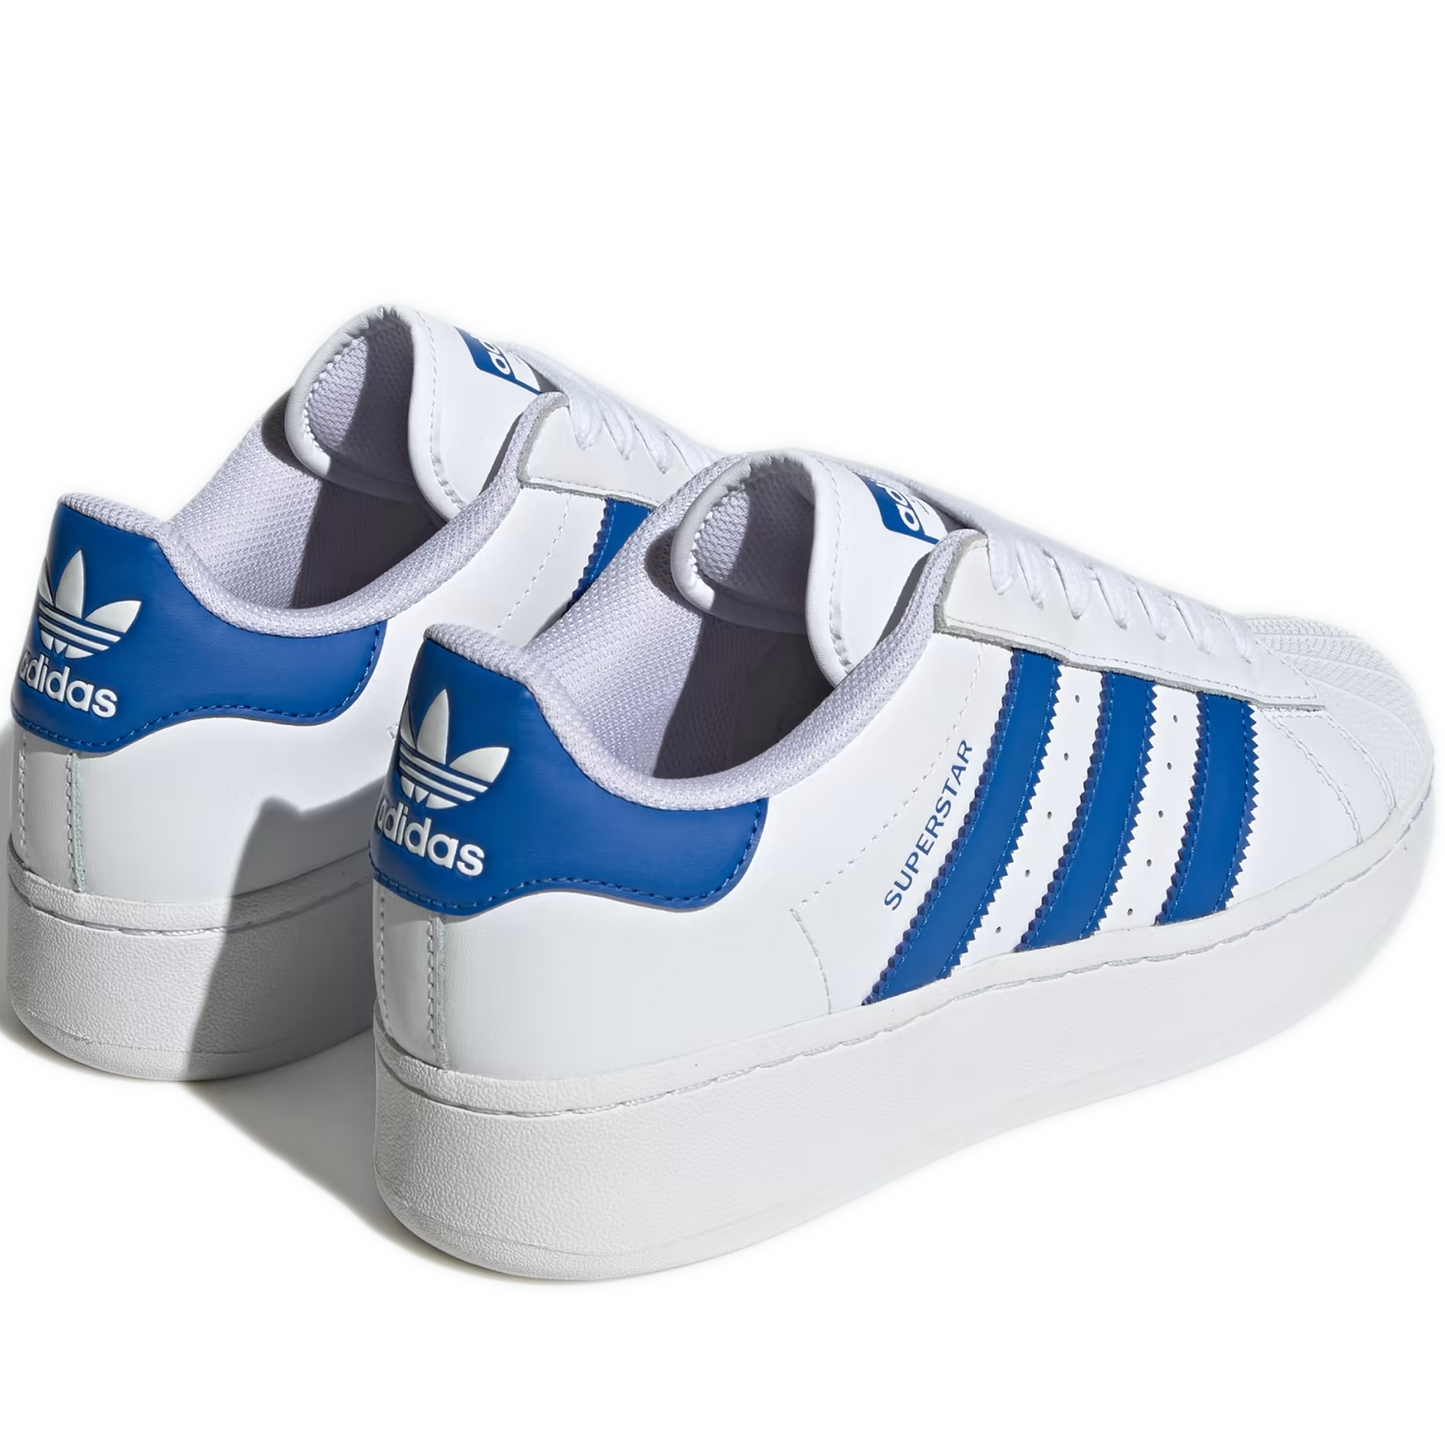 Men's Adidas Superstar XLG Shoes - White/ Blue